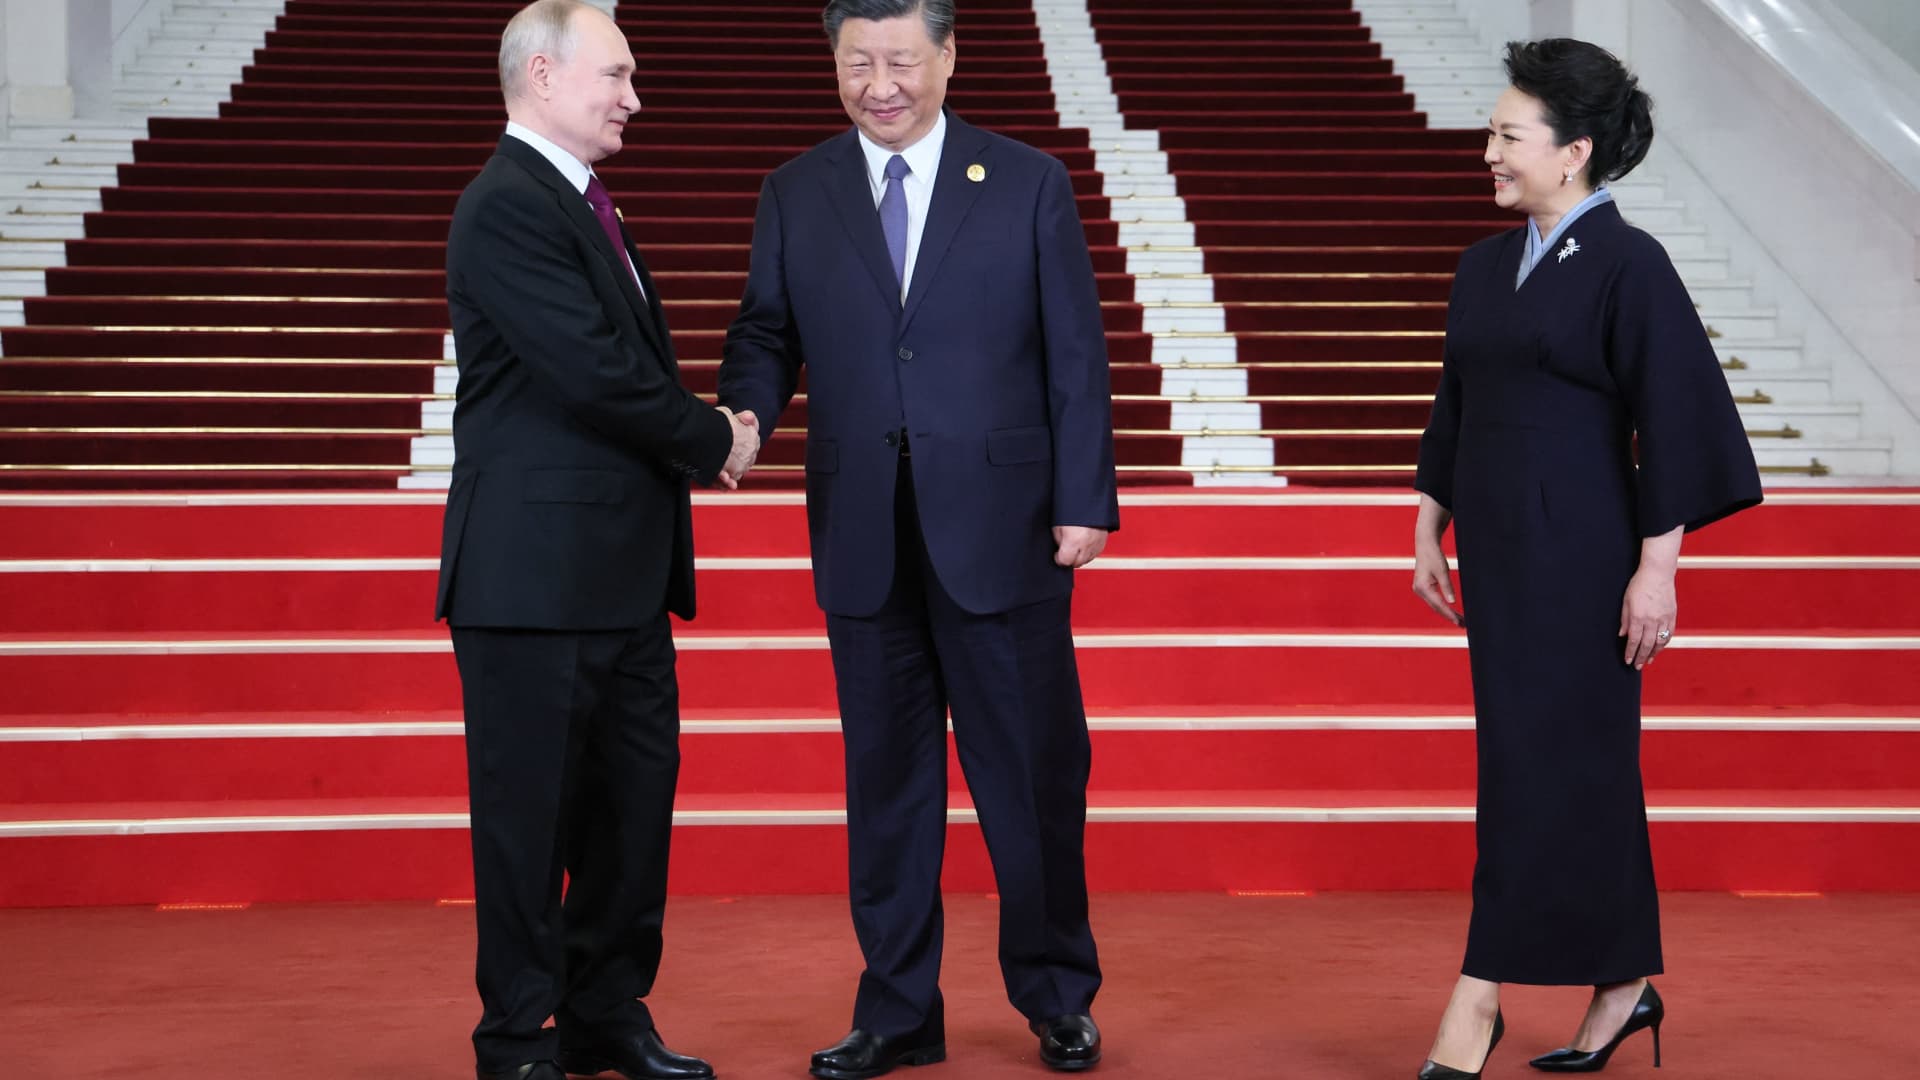 A pool photograph distributed by Russian state owned agency Sputnik shows Russia's President Vladimir Putin and China's President Xi Jinping shaking hands as the wife of the Chinese leader, Peng Liyuan, stands nearby during a welcoming ceremony at the Third Belt and Road Forum in Beijing on October 17, 2023.